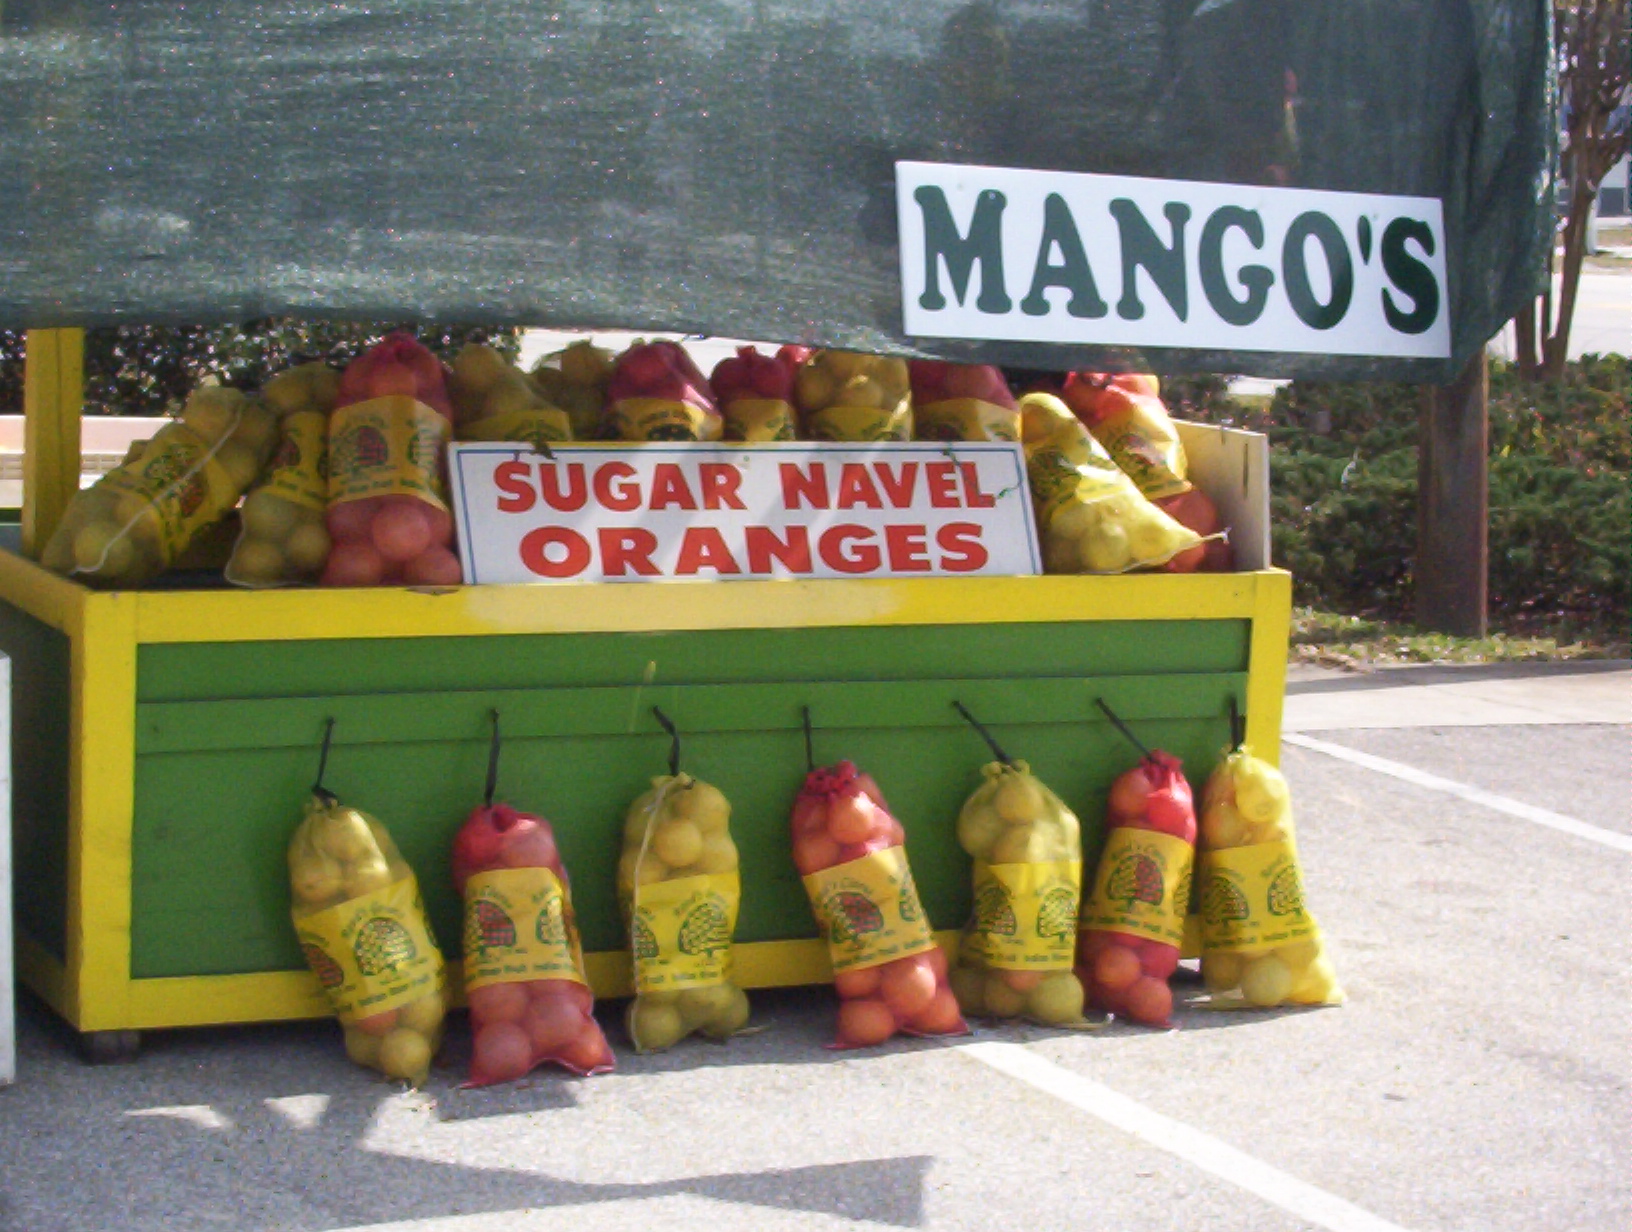 a fruit stand on a street with mangos for sale